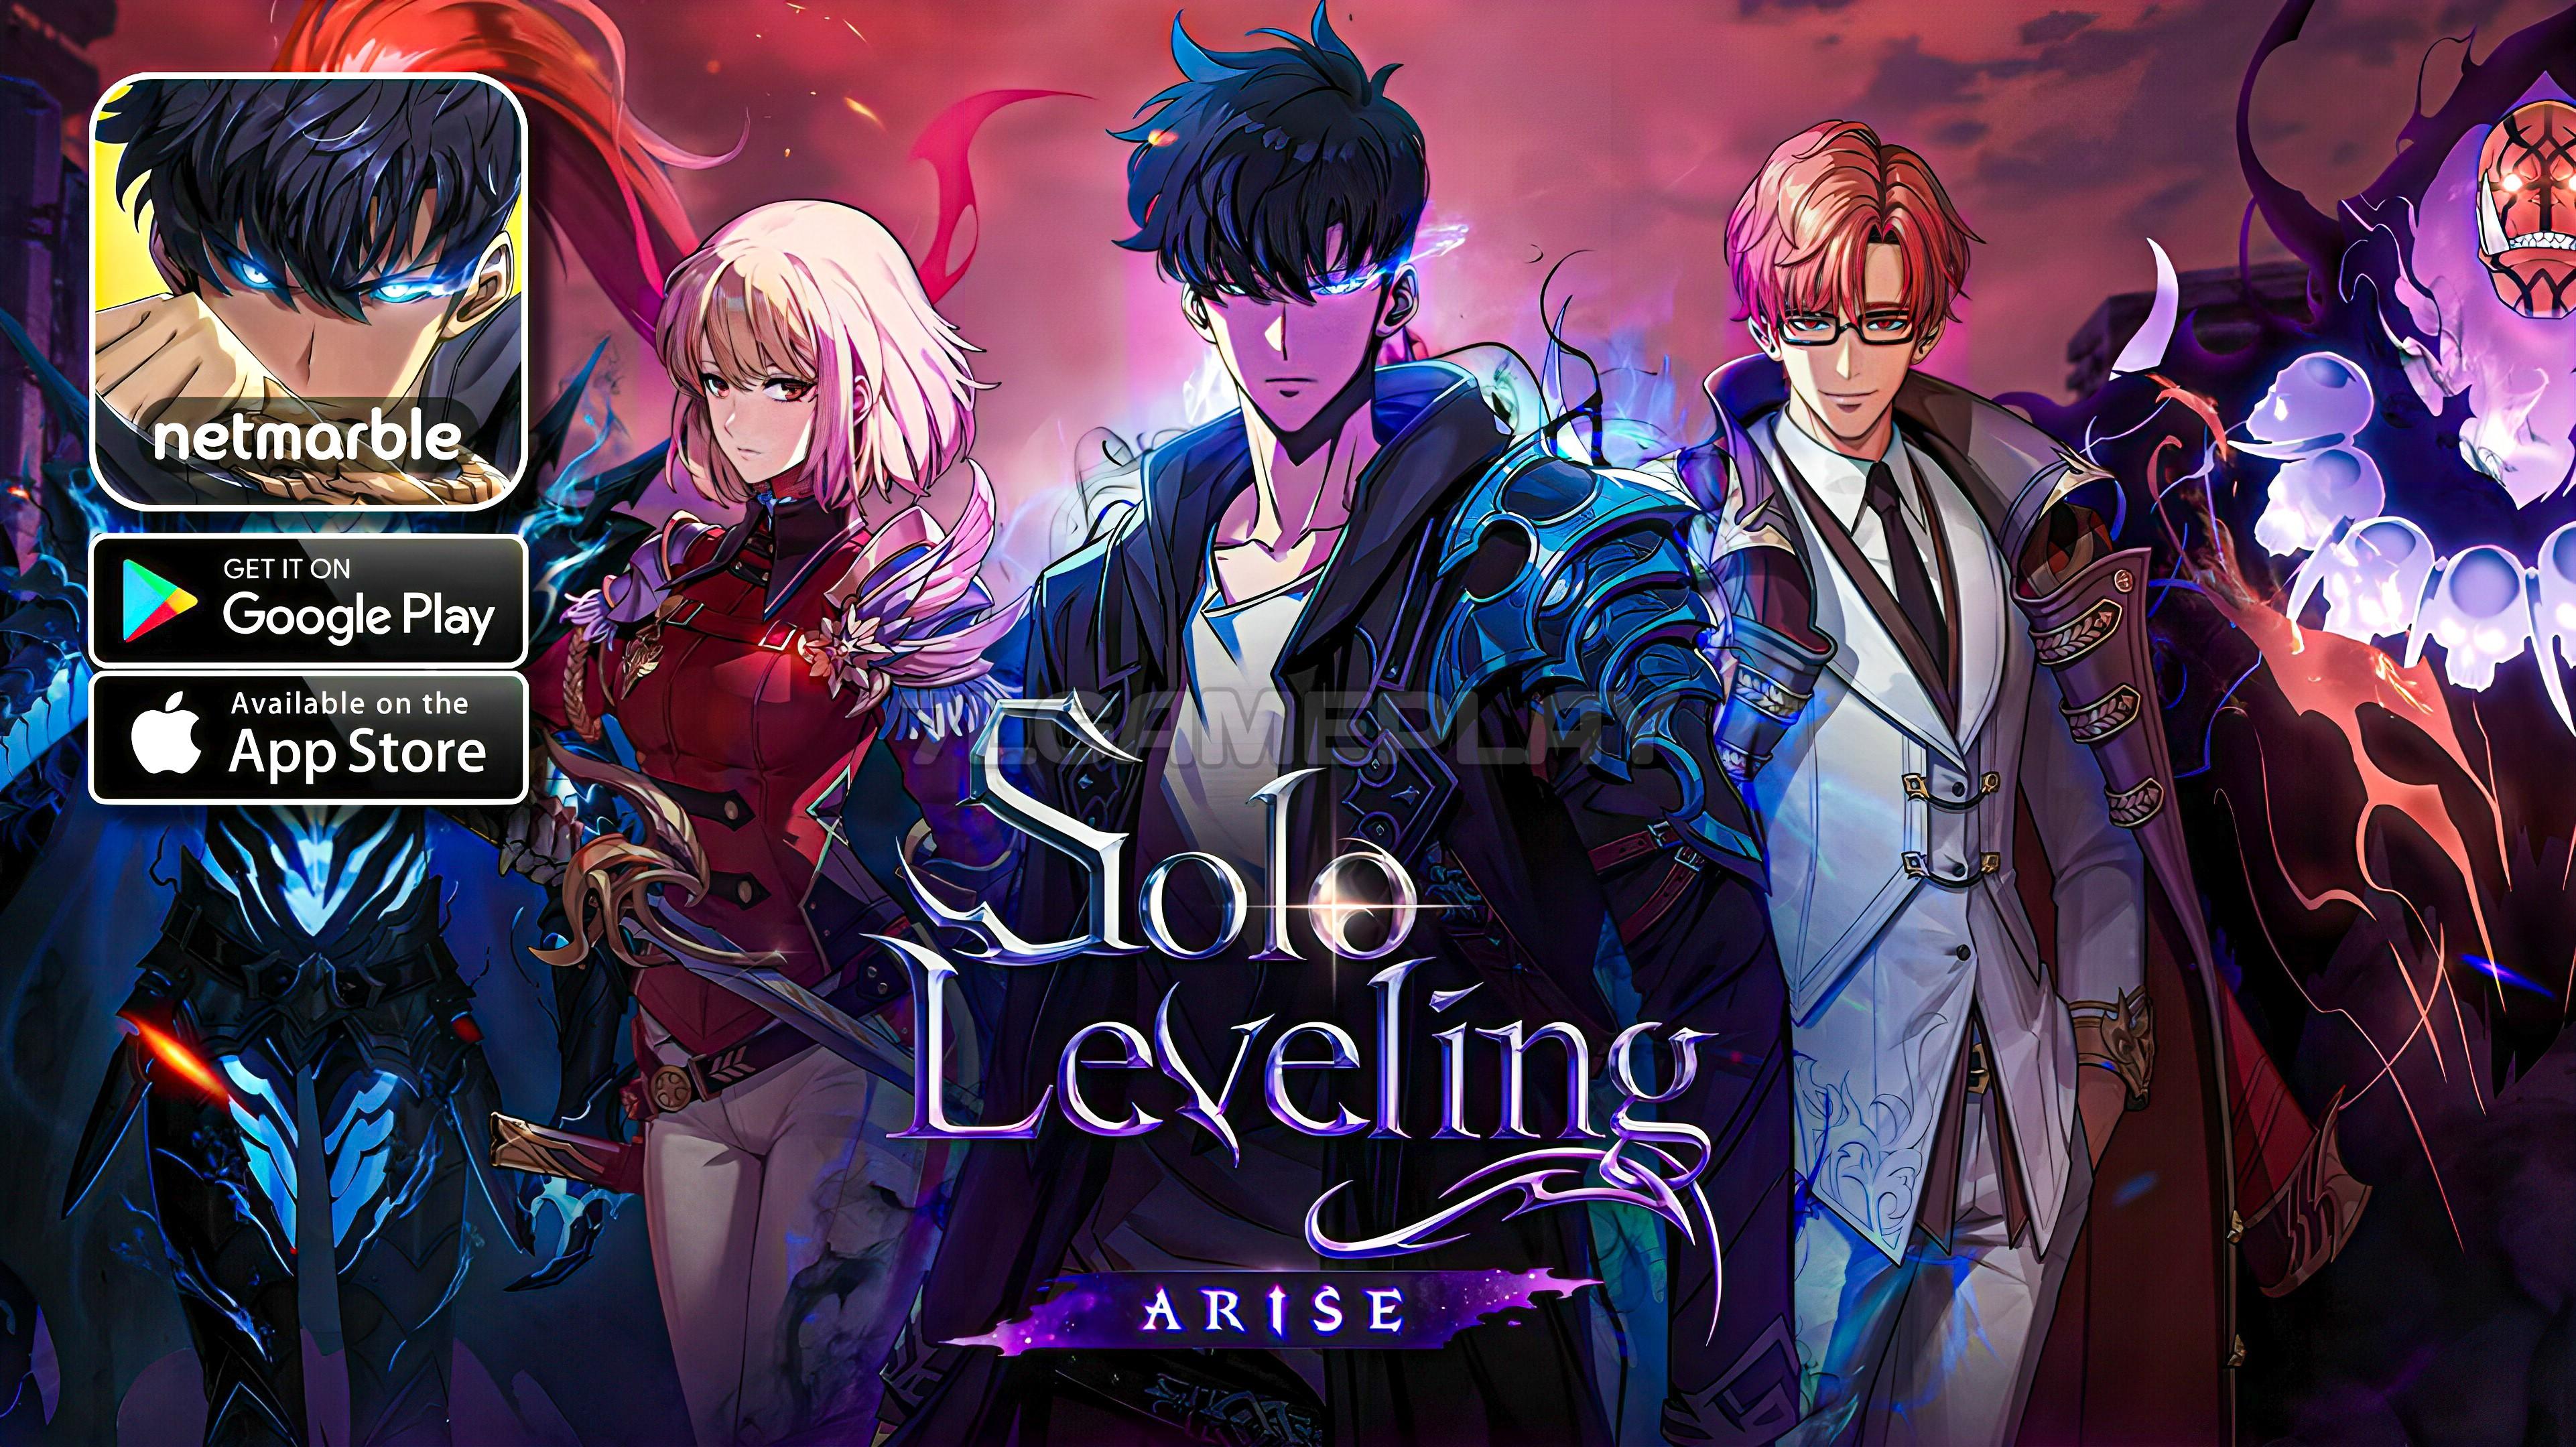 Solo Leveling Arise - Global Gameplay Android iOS